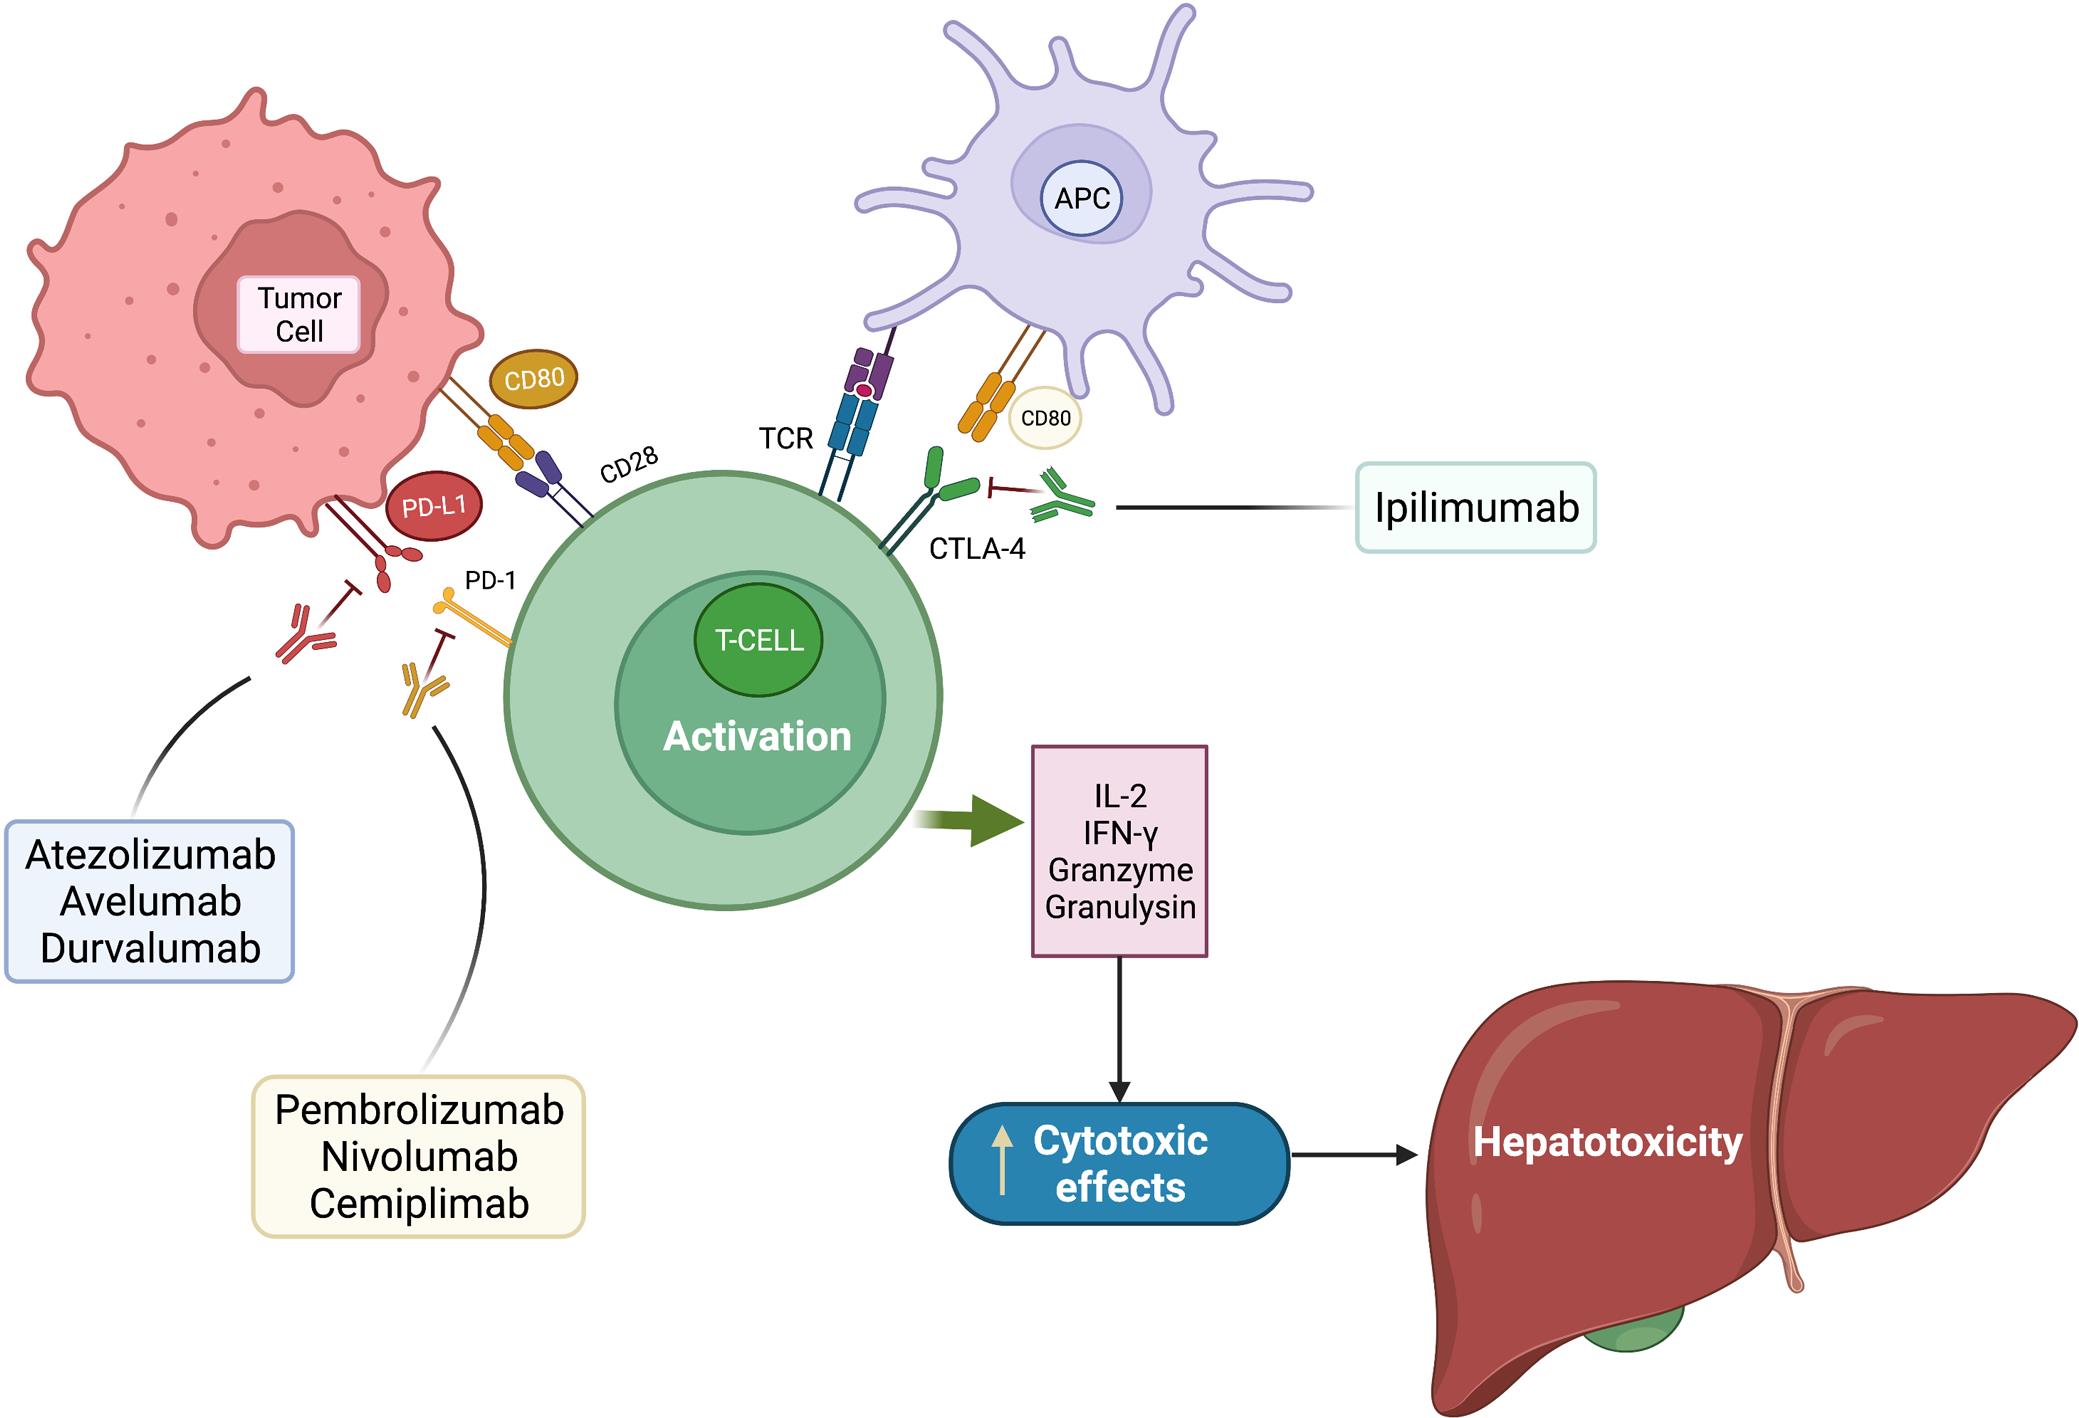 Illustration of the mechanisms of action of immune checkpoint inhibitors and proposed mechanism of hepatotoxicity.